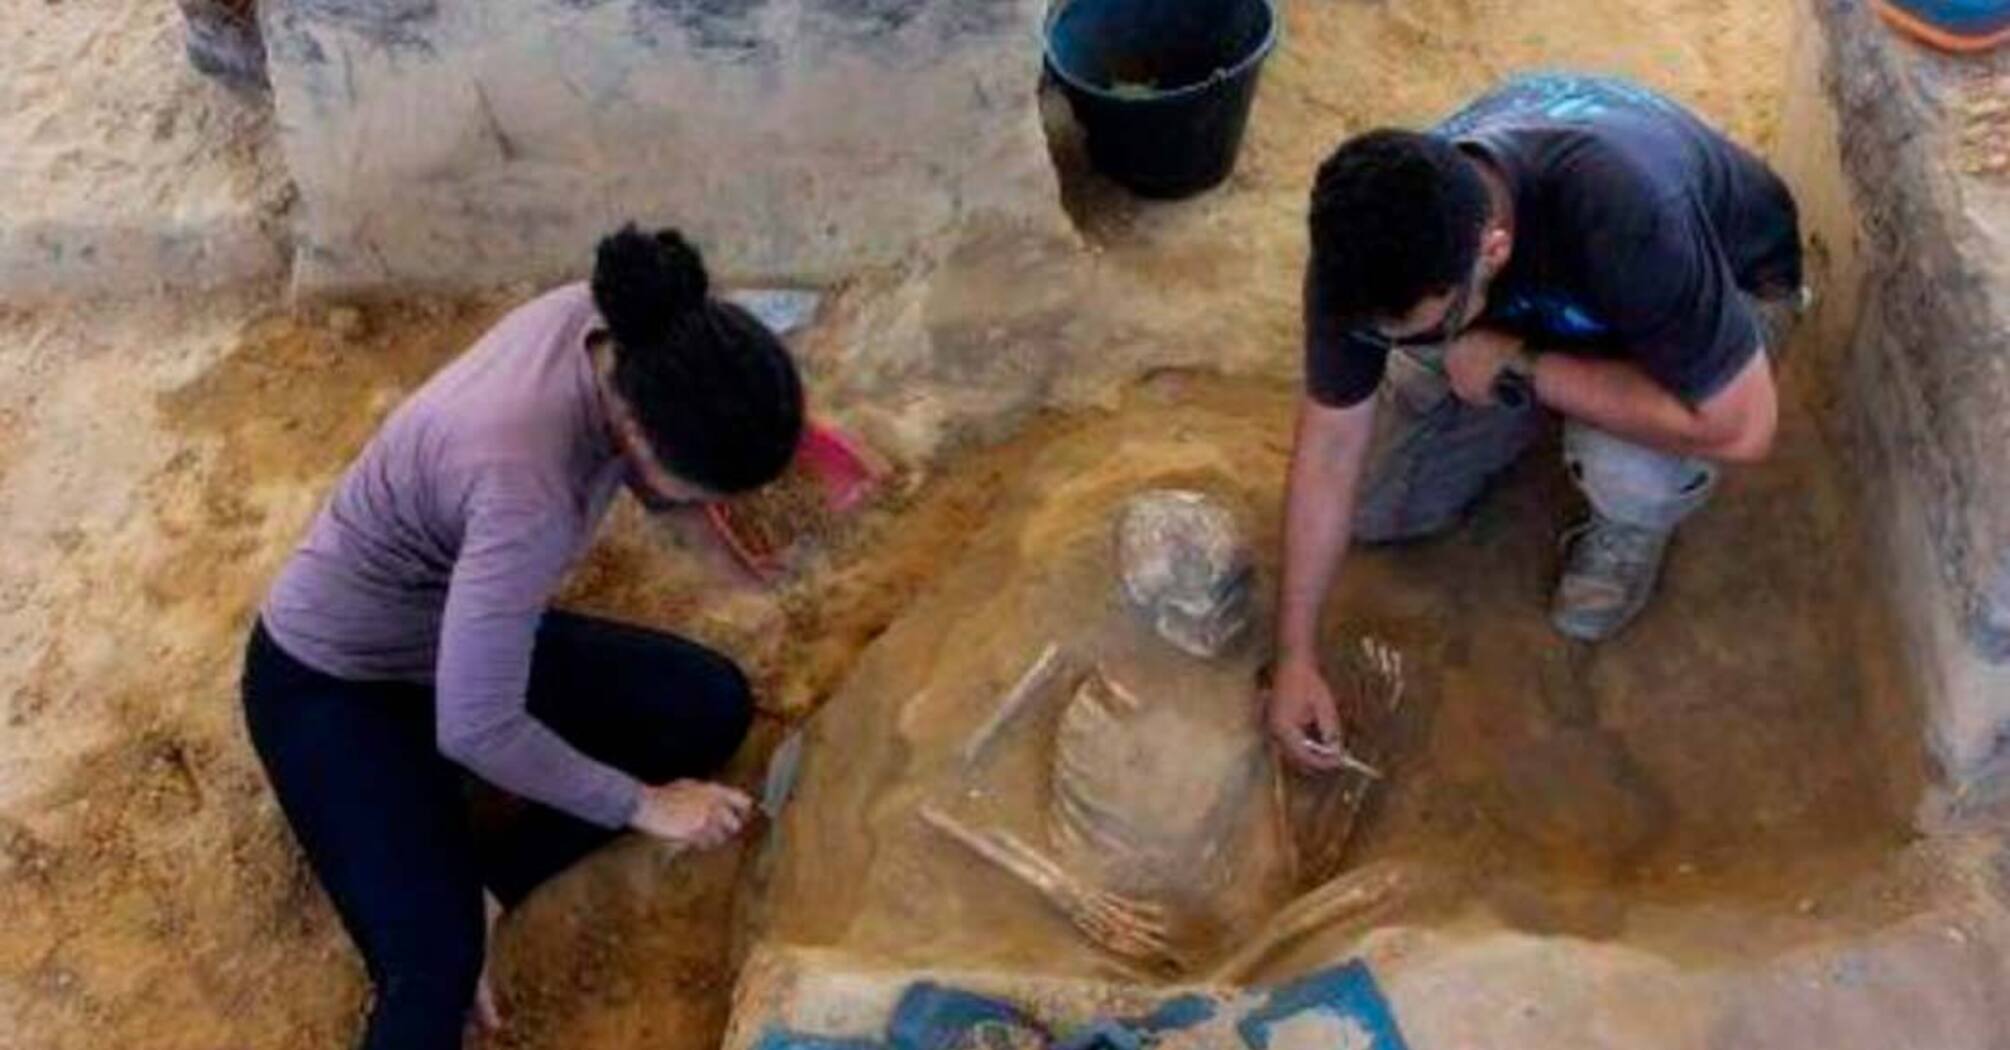 9000-year-old burial site discovered in Brazil: contained tens of thousands of unique artifacts